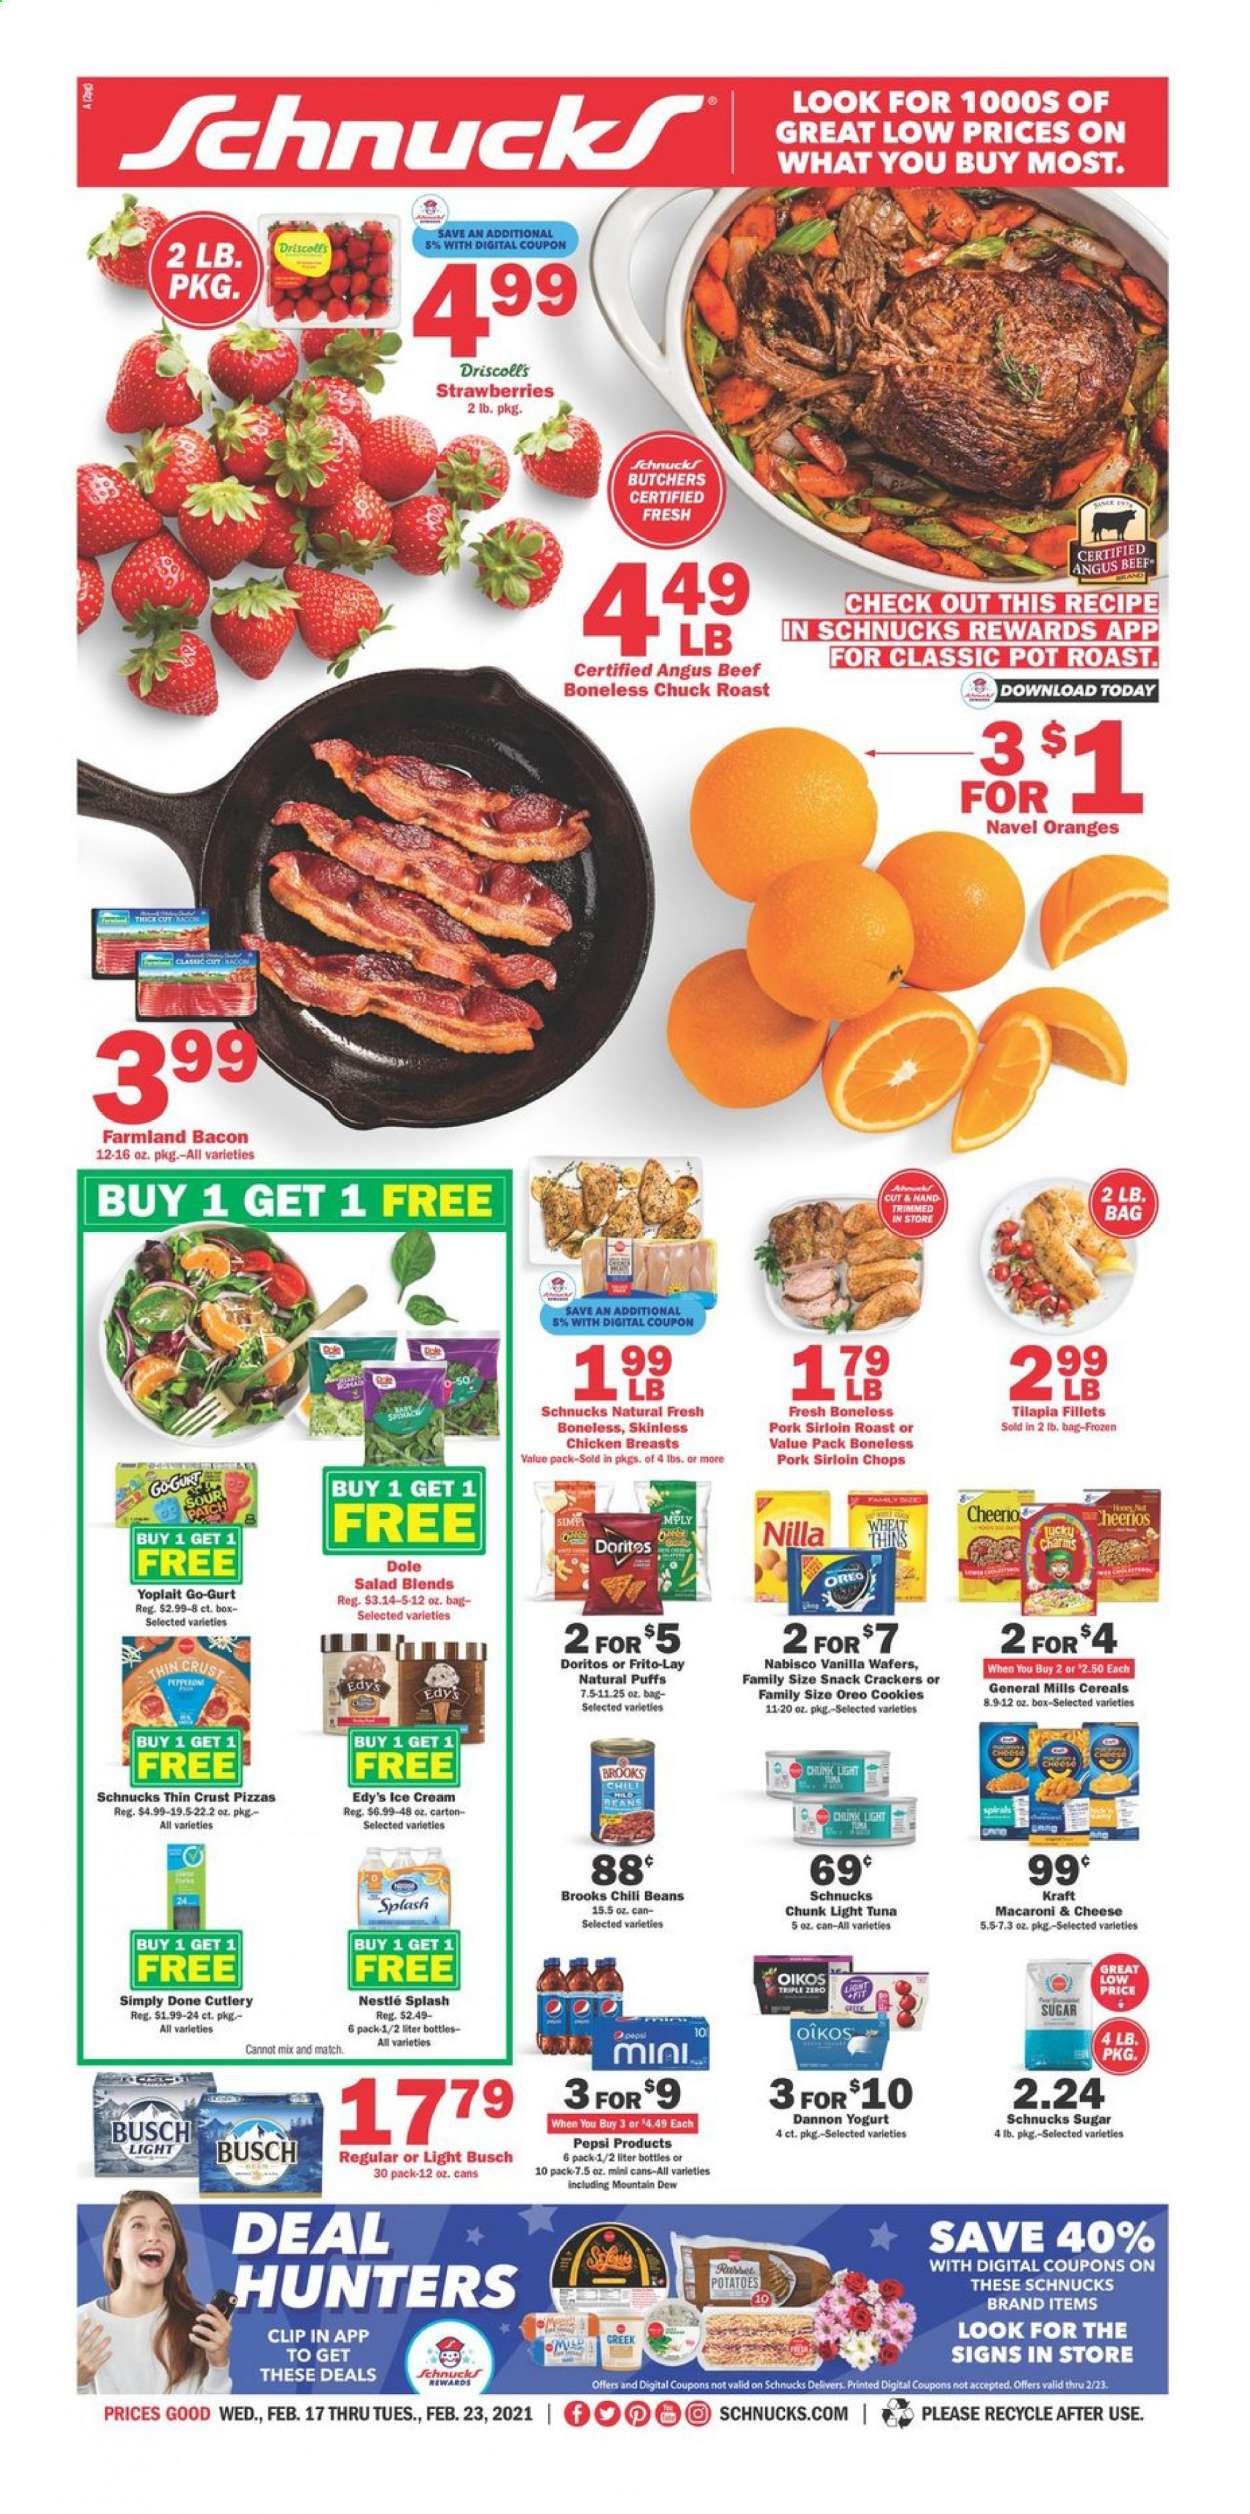 thumbnail - Schnucks Flyer - 02/17/2021 - 02/23/2021 - Sales products - Dole, puffs, oranges, tilapia, tuna, macaroni & cheese, pizza, salad, Kraft®, bacon, Oreo, yoghurt, Oikos, Yoplait, Dannon, ice cream, beans, strawberries, cookies, Nestlé, wafers, crackers, Doritos, snack, Thins, Frito-Lay, sugar, chili beans, light tuna, cereals, Mountain Dew, Pepsi, Busch, chicken breasts, beef meat, chuck roast, pork loin. Page 1.